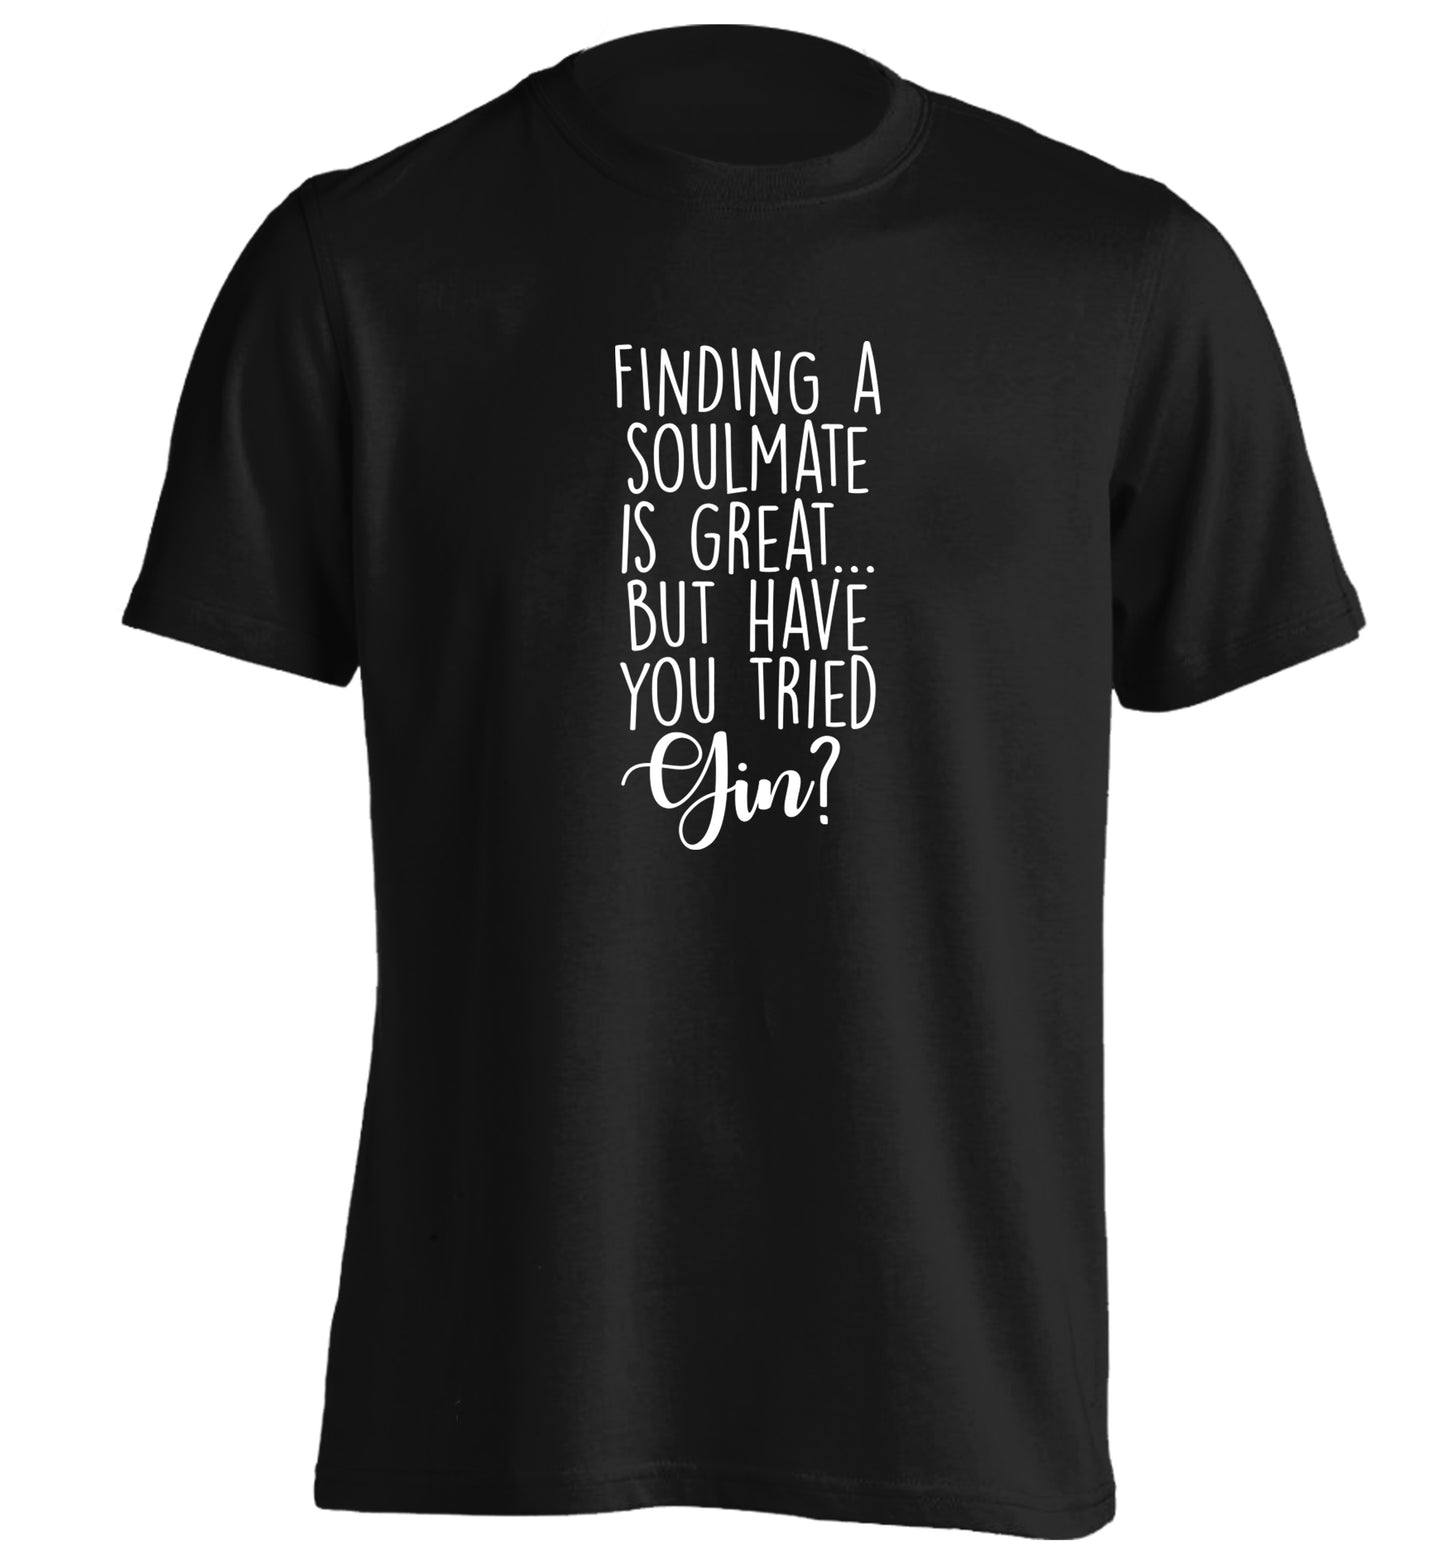 Finding a soulmate is great but have you tried gin? adults unisex black Tshirt 2XL